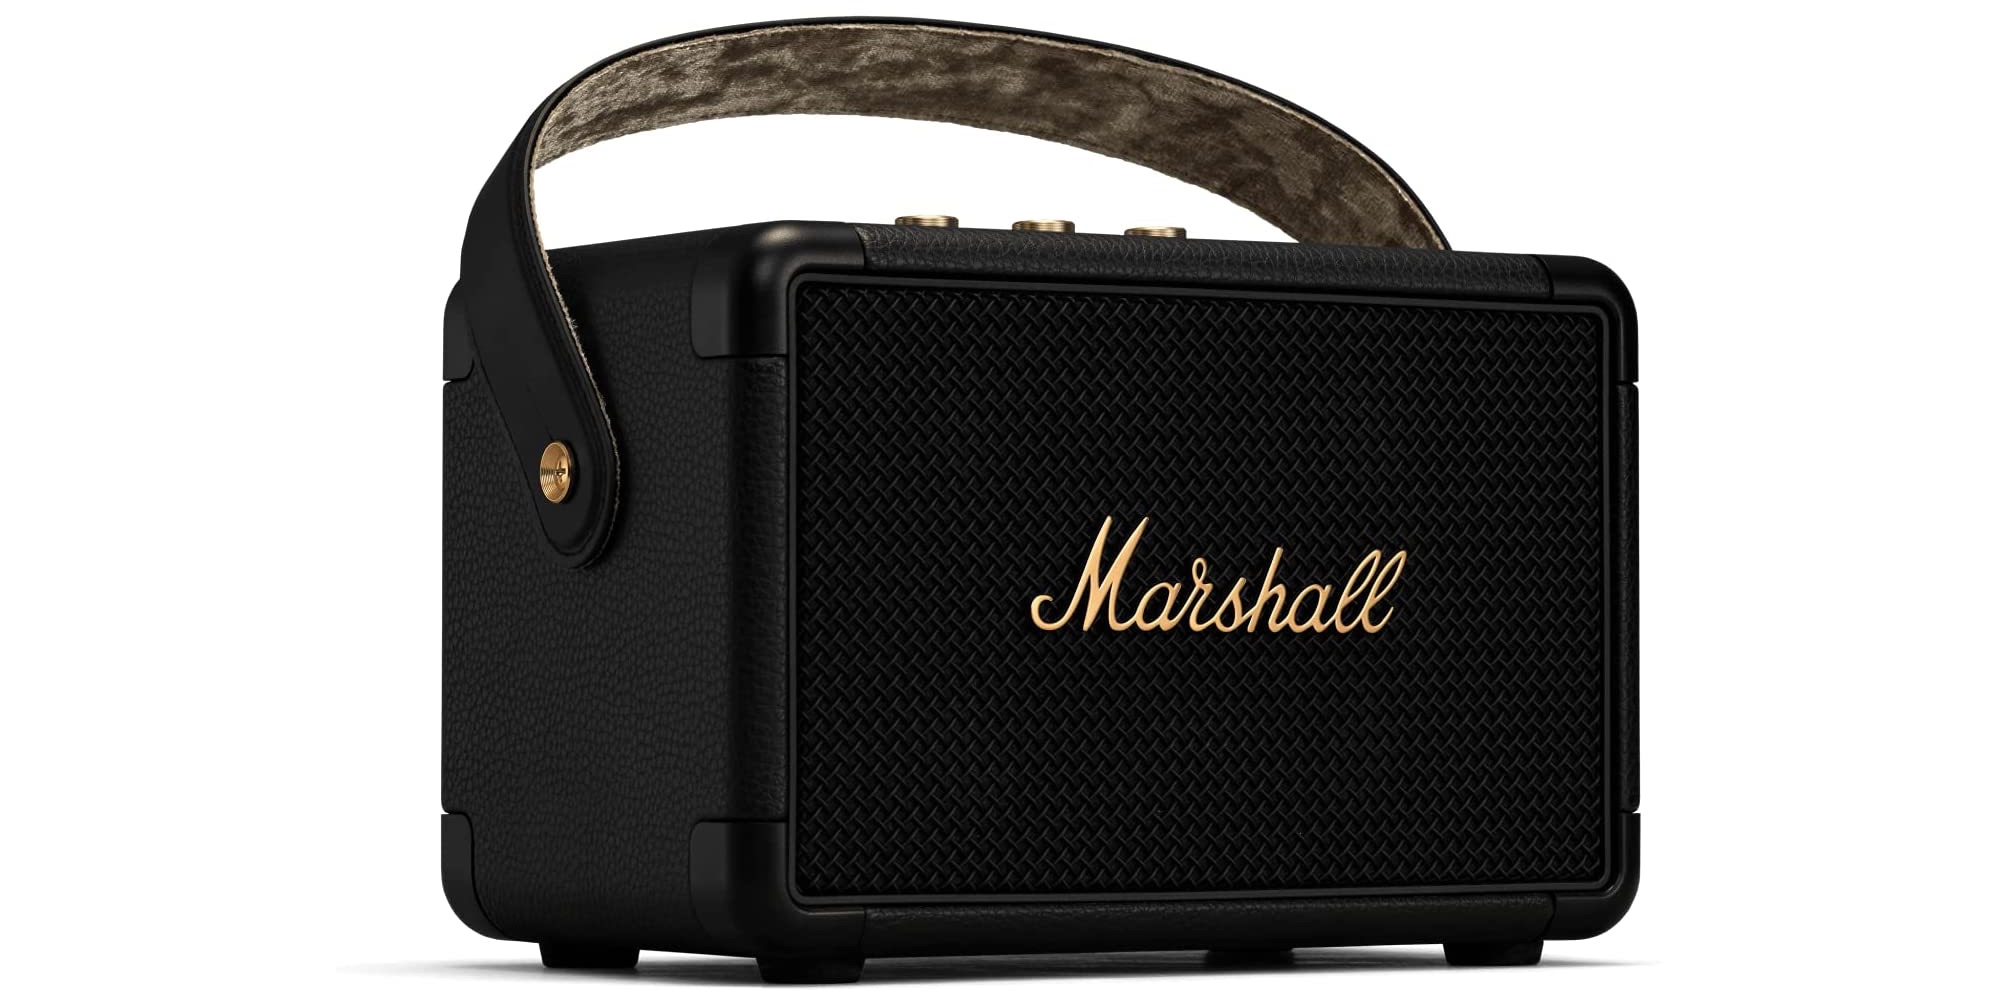 Marshall\'s popular vinyl-wrapped portable sale speakers from Bluetooth $130 on